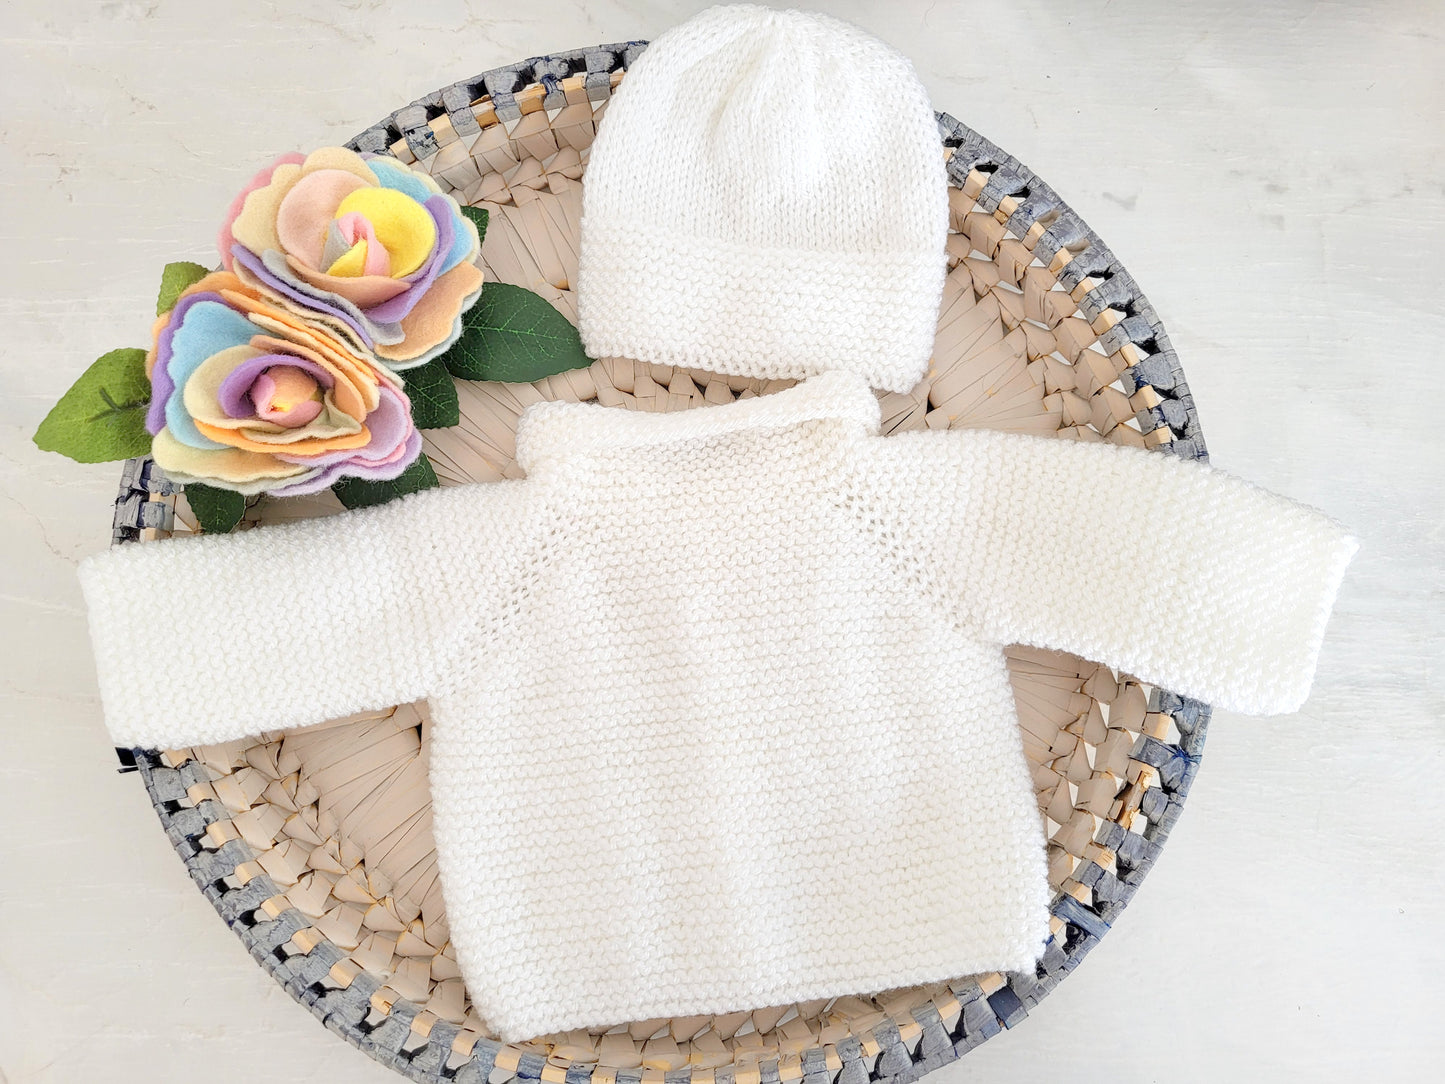 white knitted baby neutrals outfit for baby gift